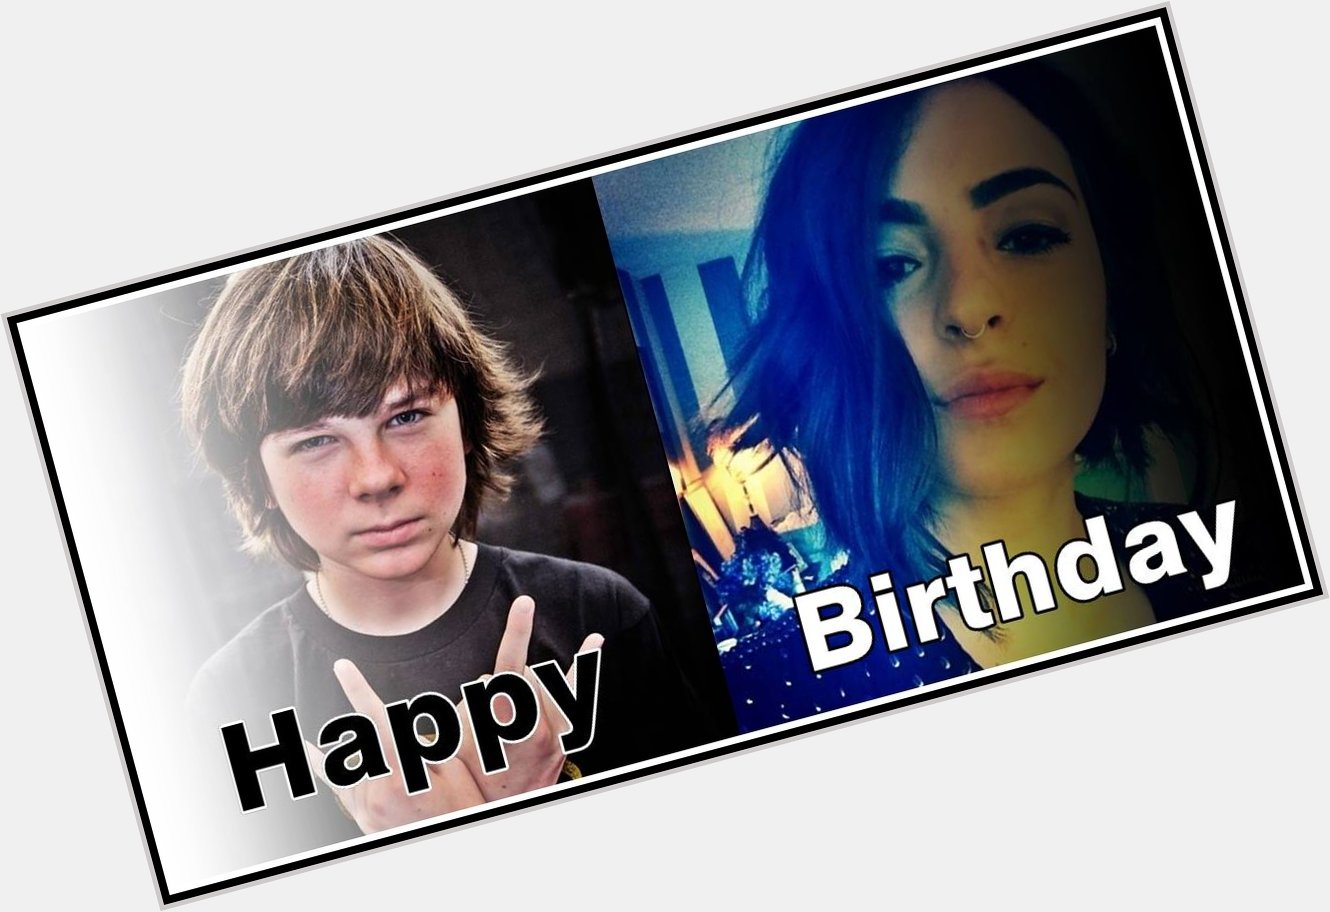 Happy birthday to the awesome Chandler Riggs & Alanna Masterson 